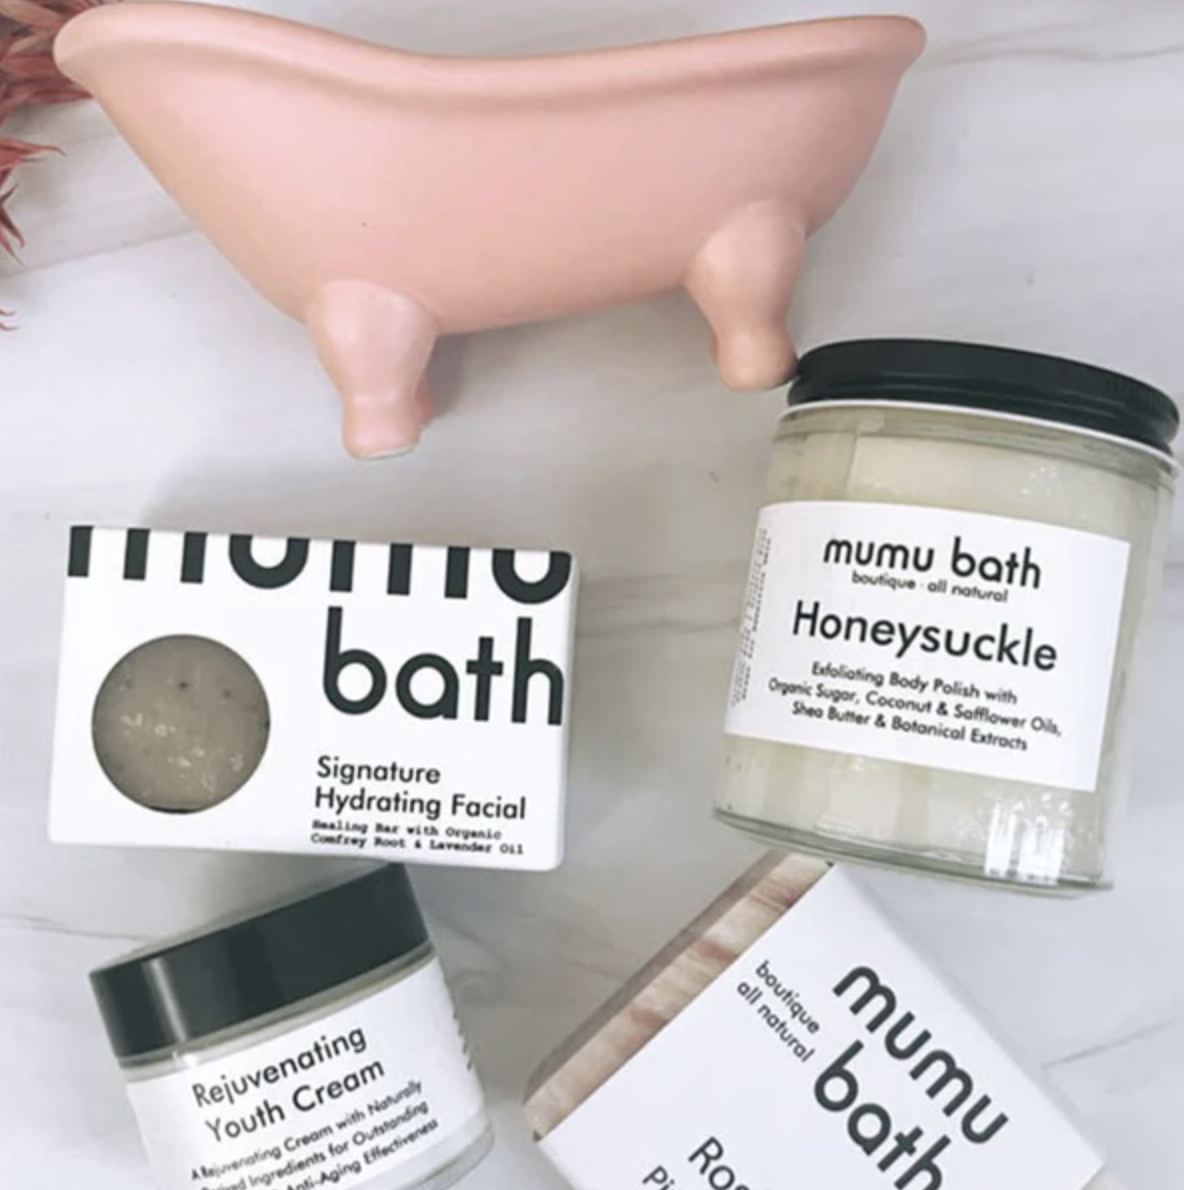 A selection of Mumu Bath skincare products including a soap, facial hydrator, and body polish